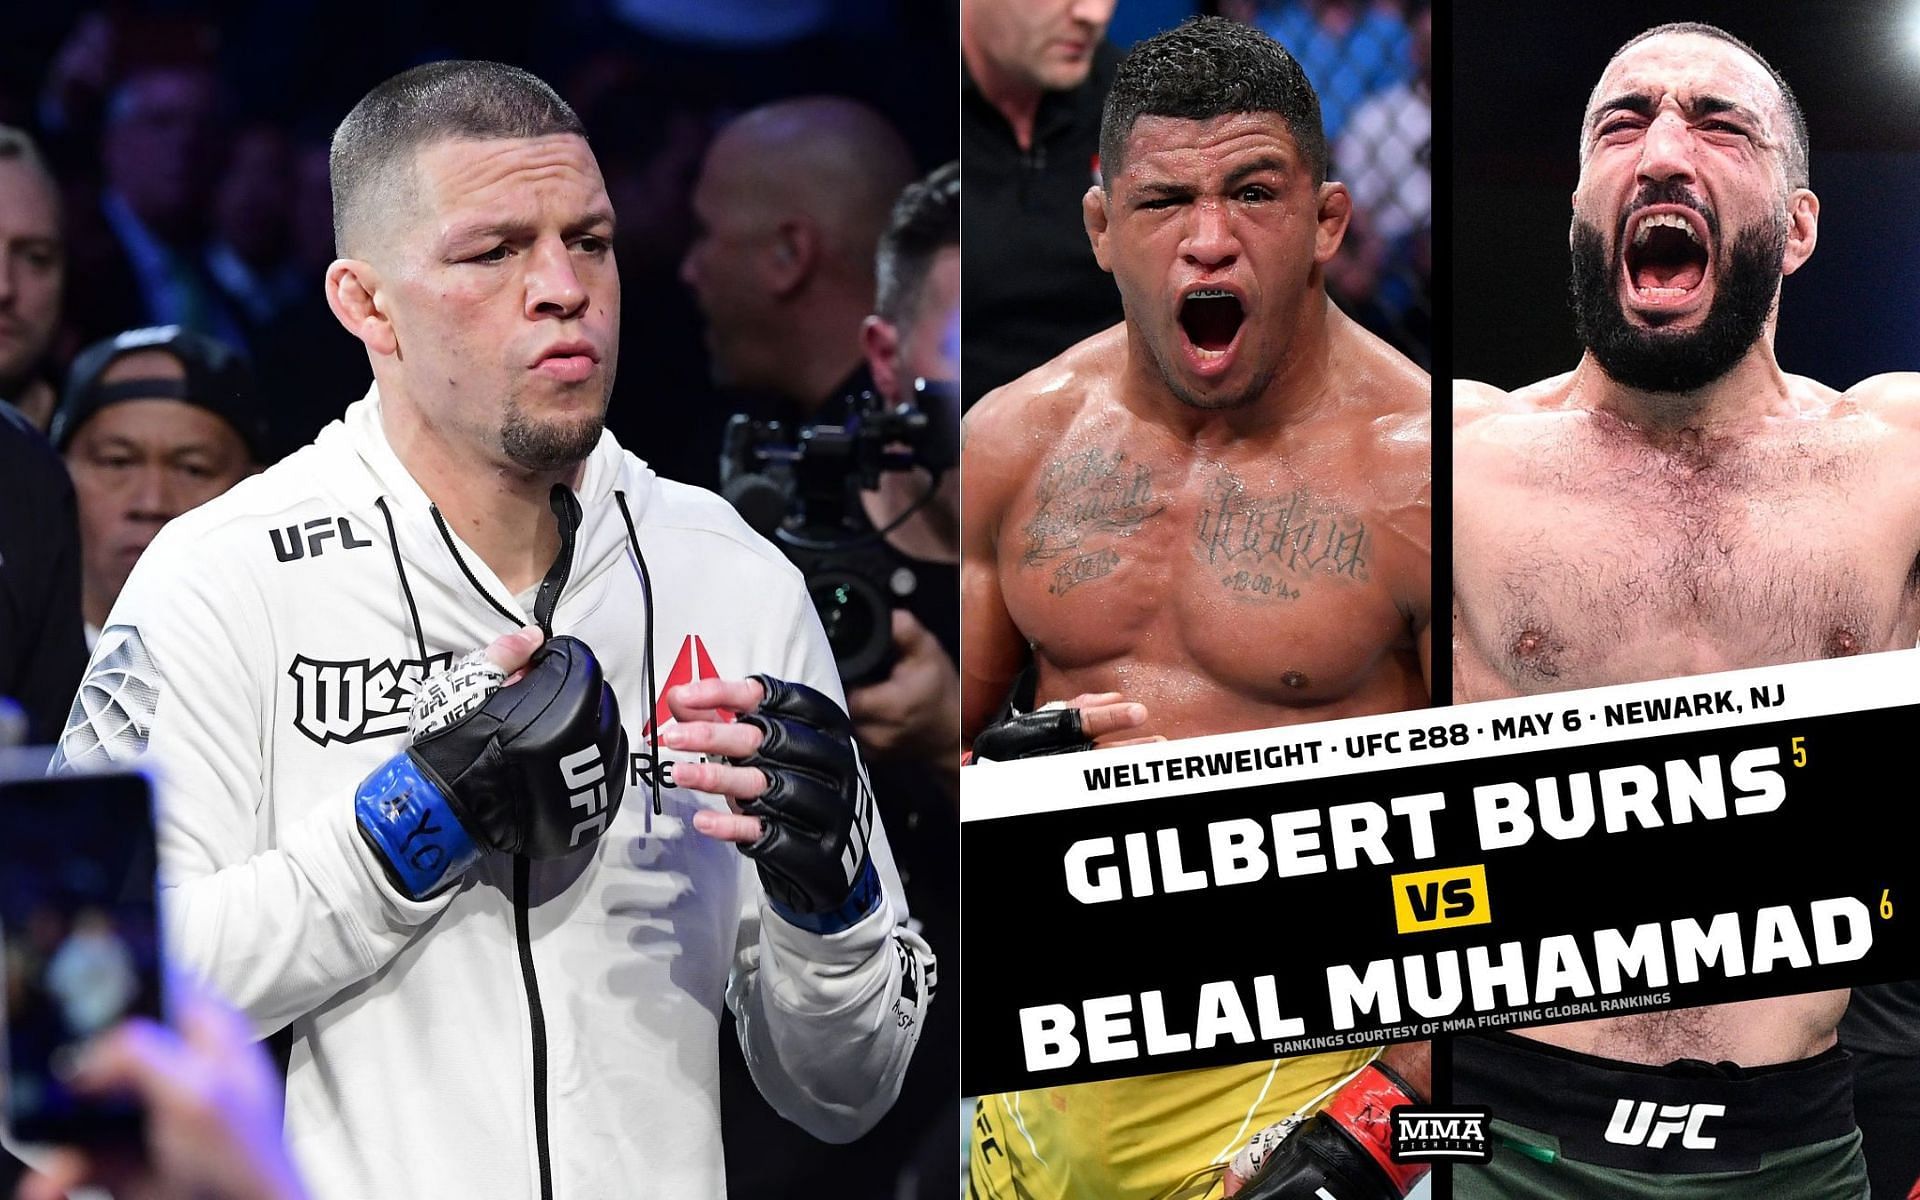 Belal Muhammad draws parallels with Nate Diaz ahead of his fight against Gilbert Burns [[Image credits: @mmafighting on Instagram]